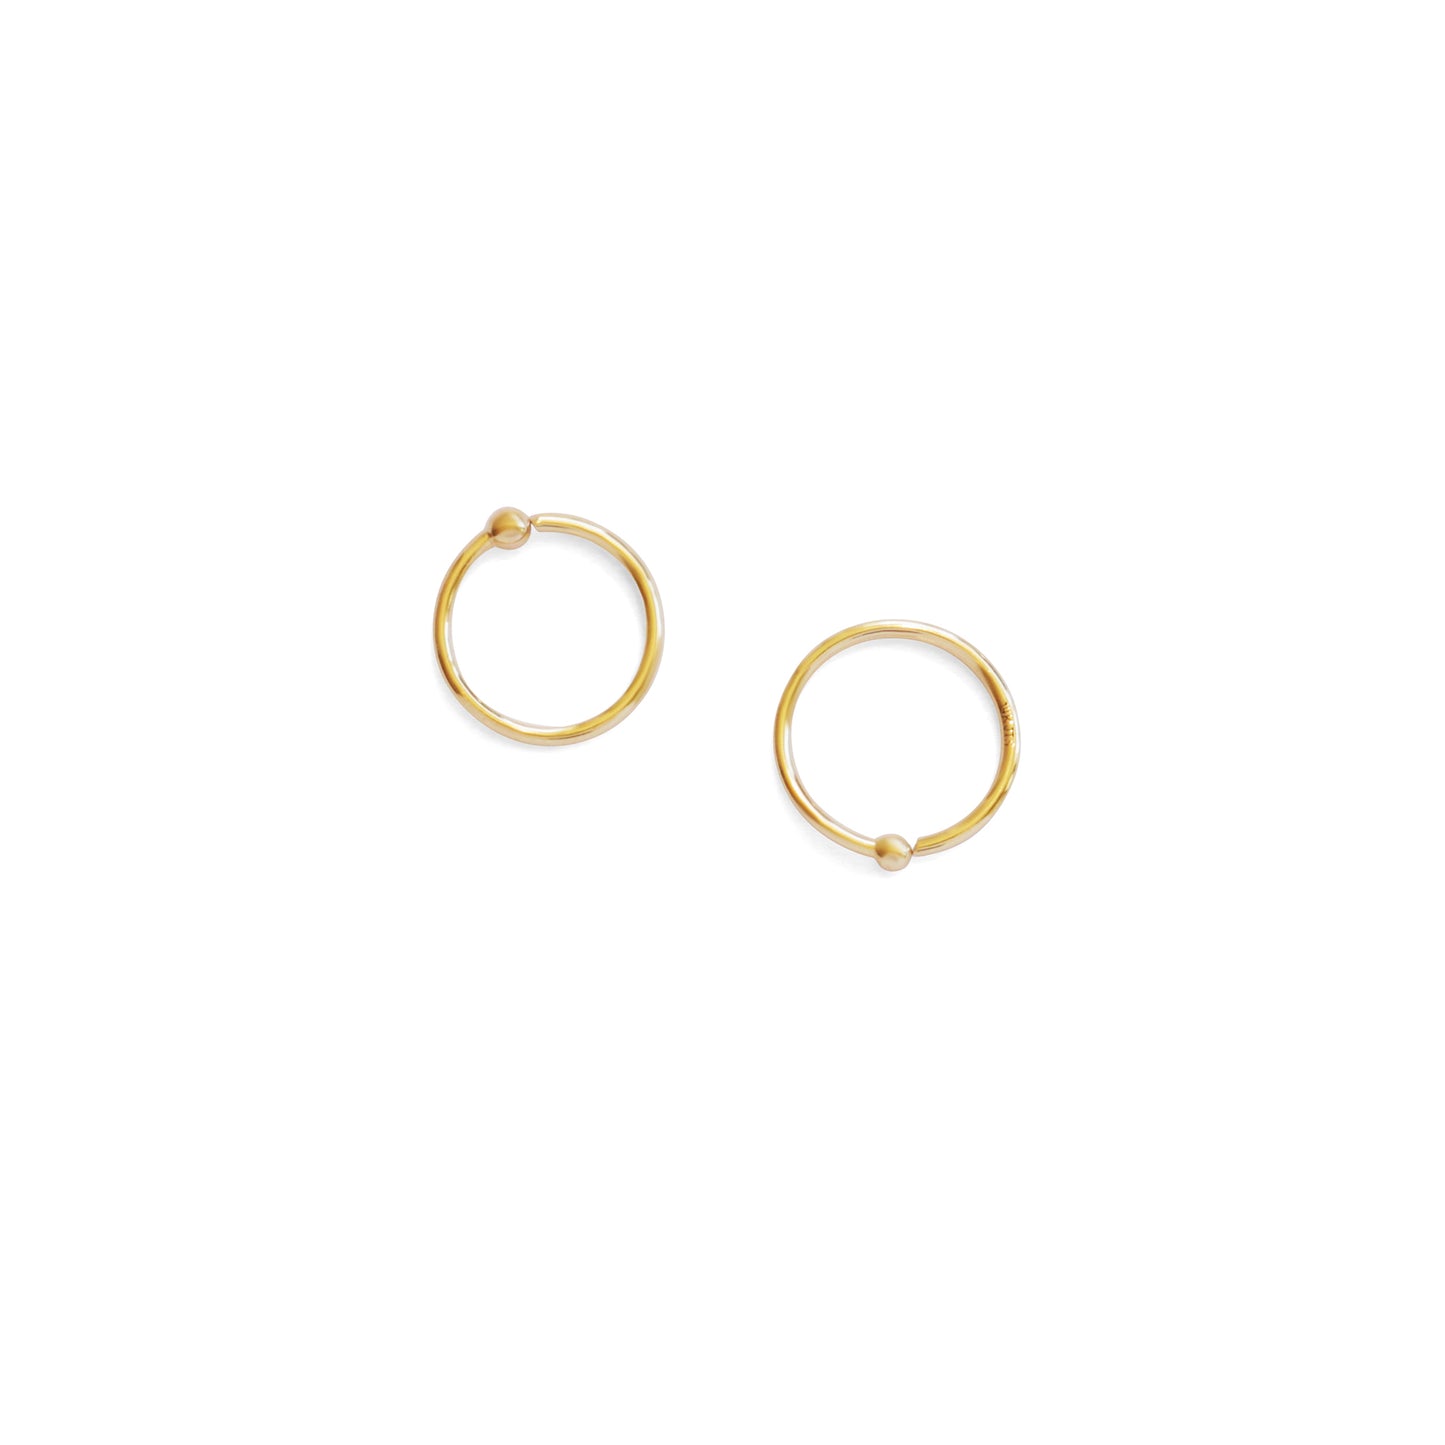 Load image into Gallery viewer, Ball End Hoops - Goldpoint Studio - Greenpoint, Brooklyn - Fine Jewelry
